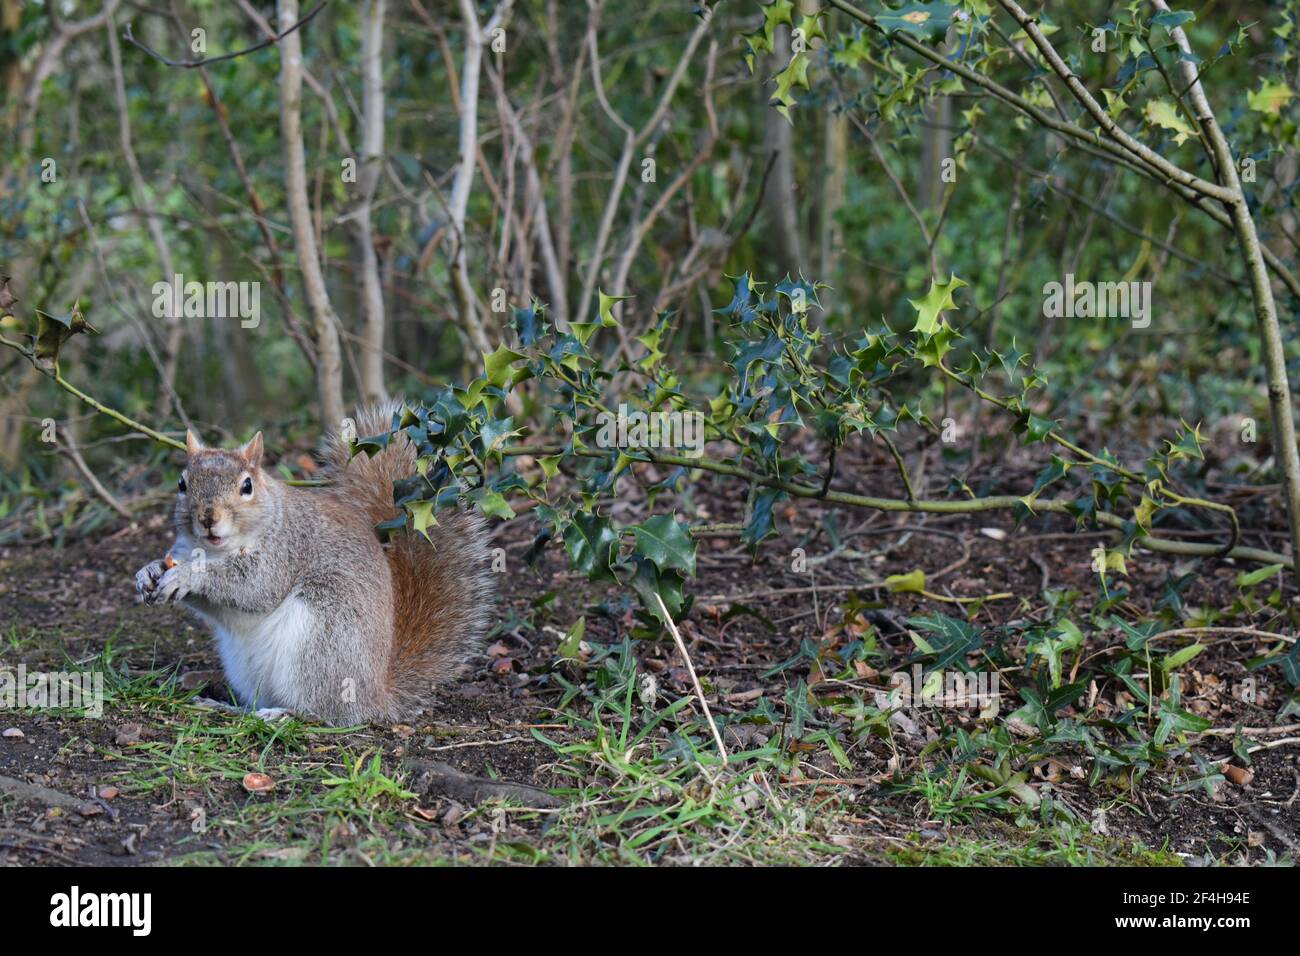 Squirrel with grey fur bushy tail eating near holly. It likes acorns bulbs tree shoots buds fungi nuts roots occasionally taking birds eggs and chicks Stock Photo